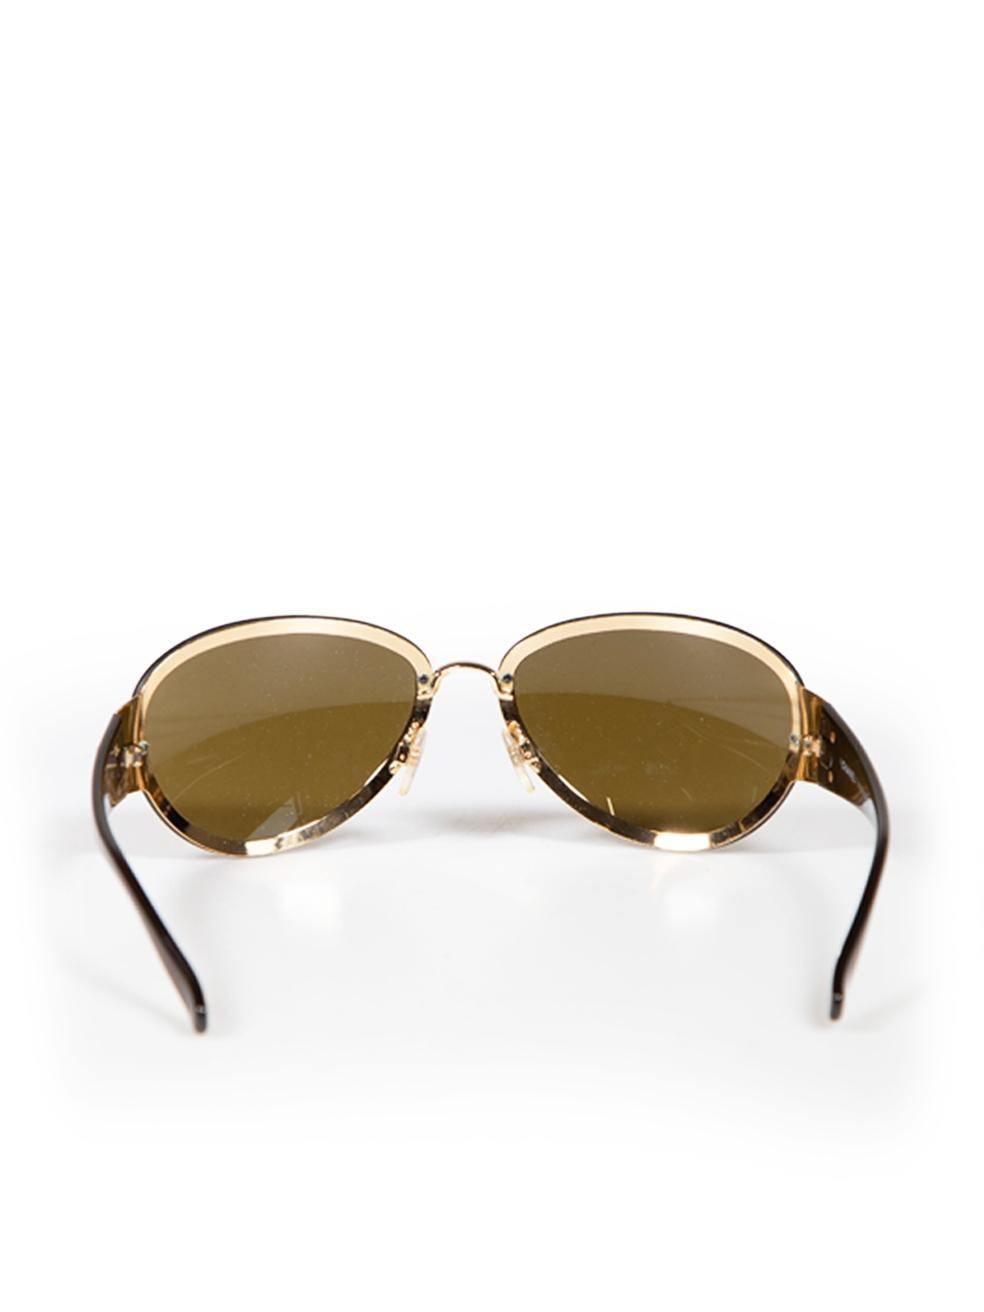 Chanel Brown Shield Sunglasses In Good Condition For Sale In London, GB